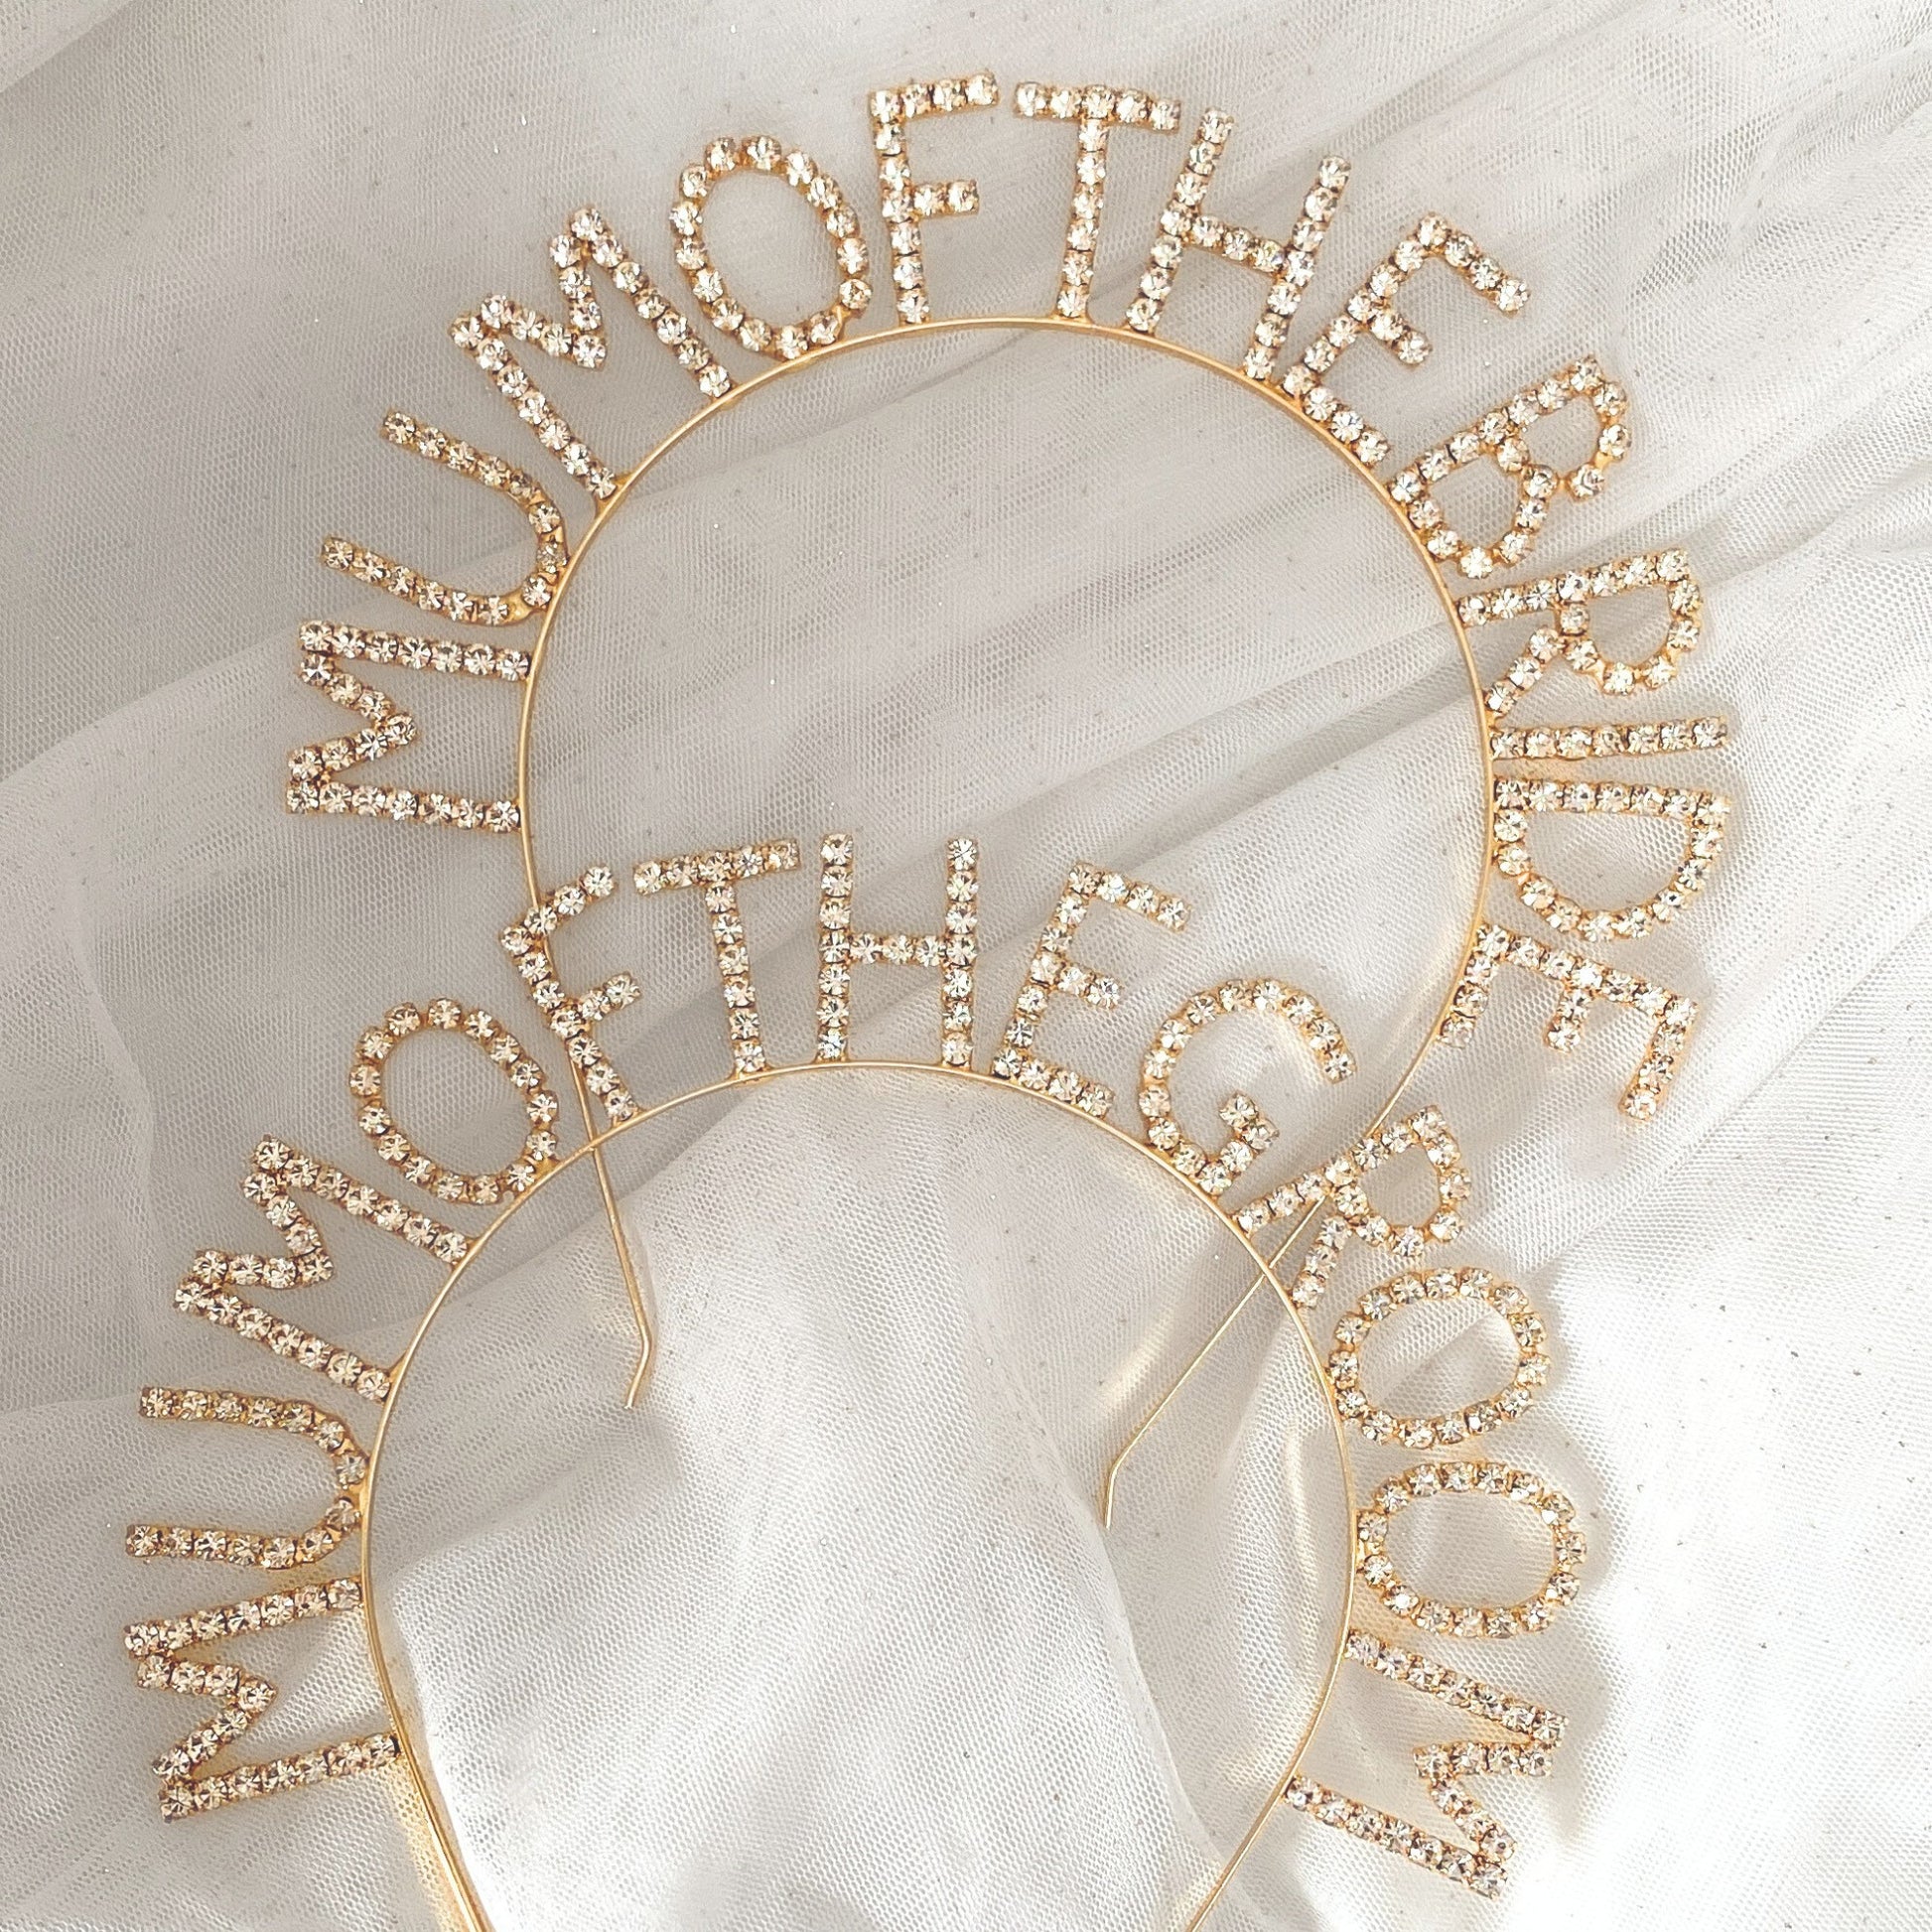 Mother of the Bride Hairband in gold and silver, diamanté design